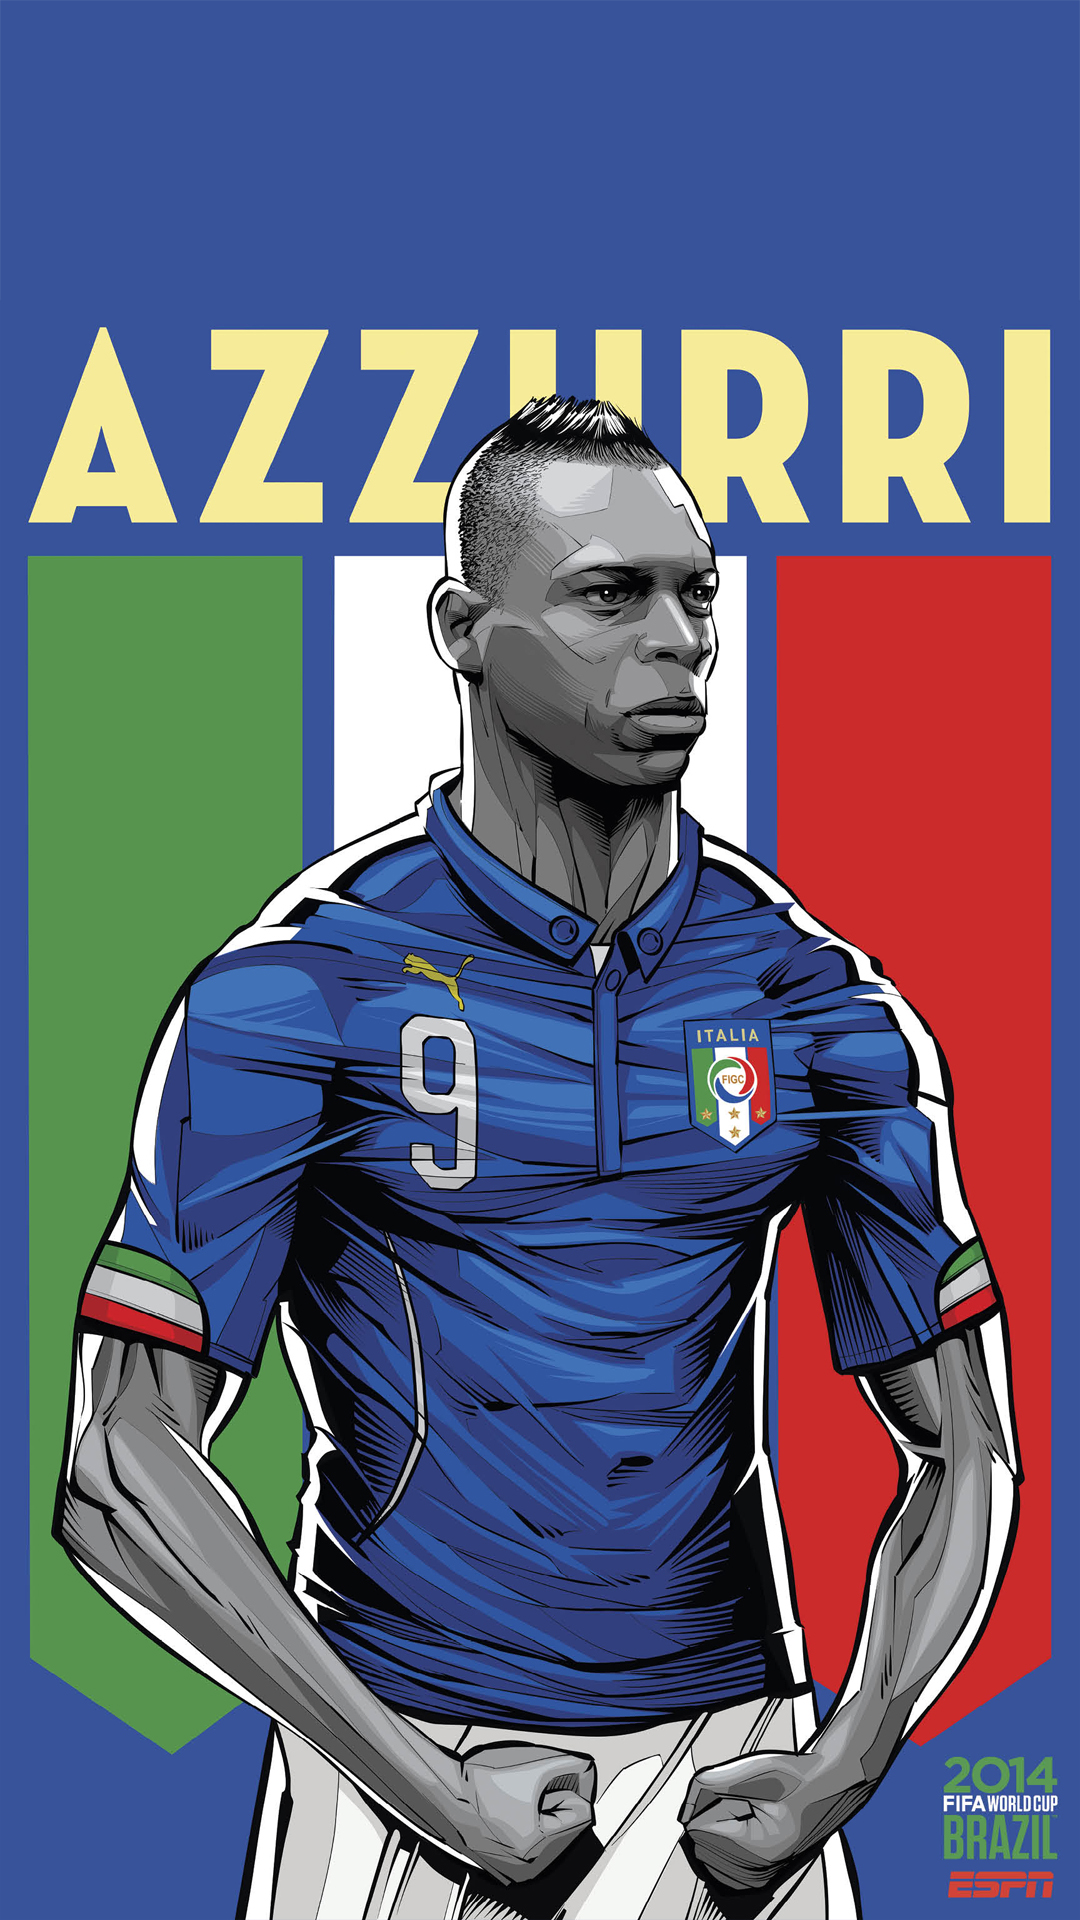 World Cup 2014 Italy htc one wallpaper